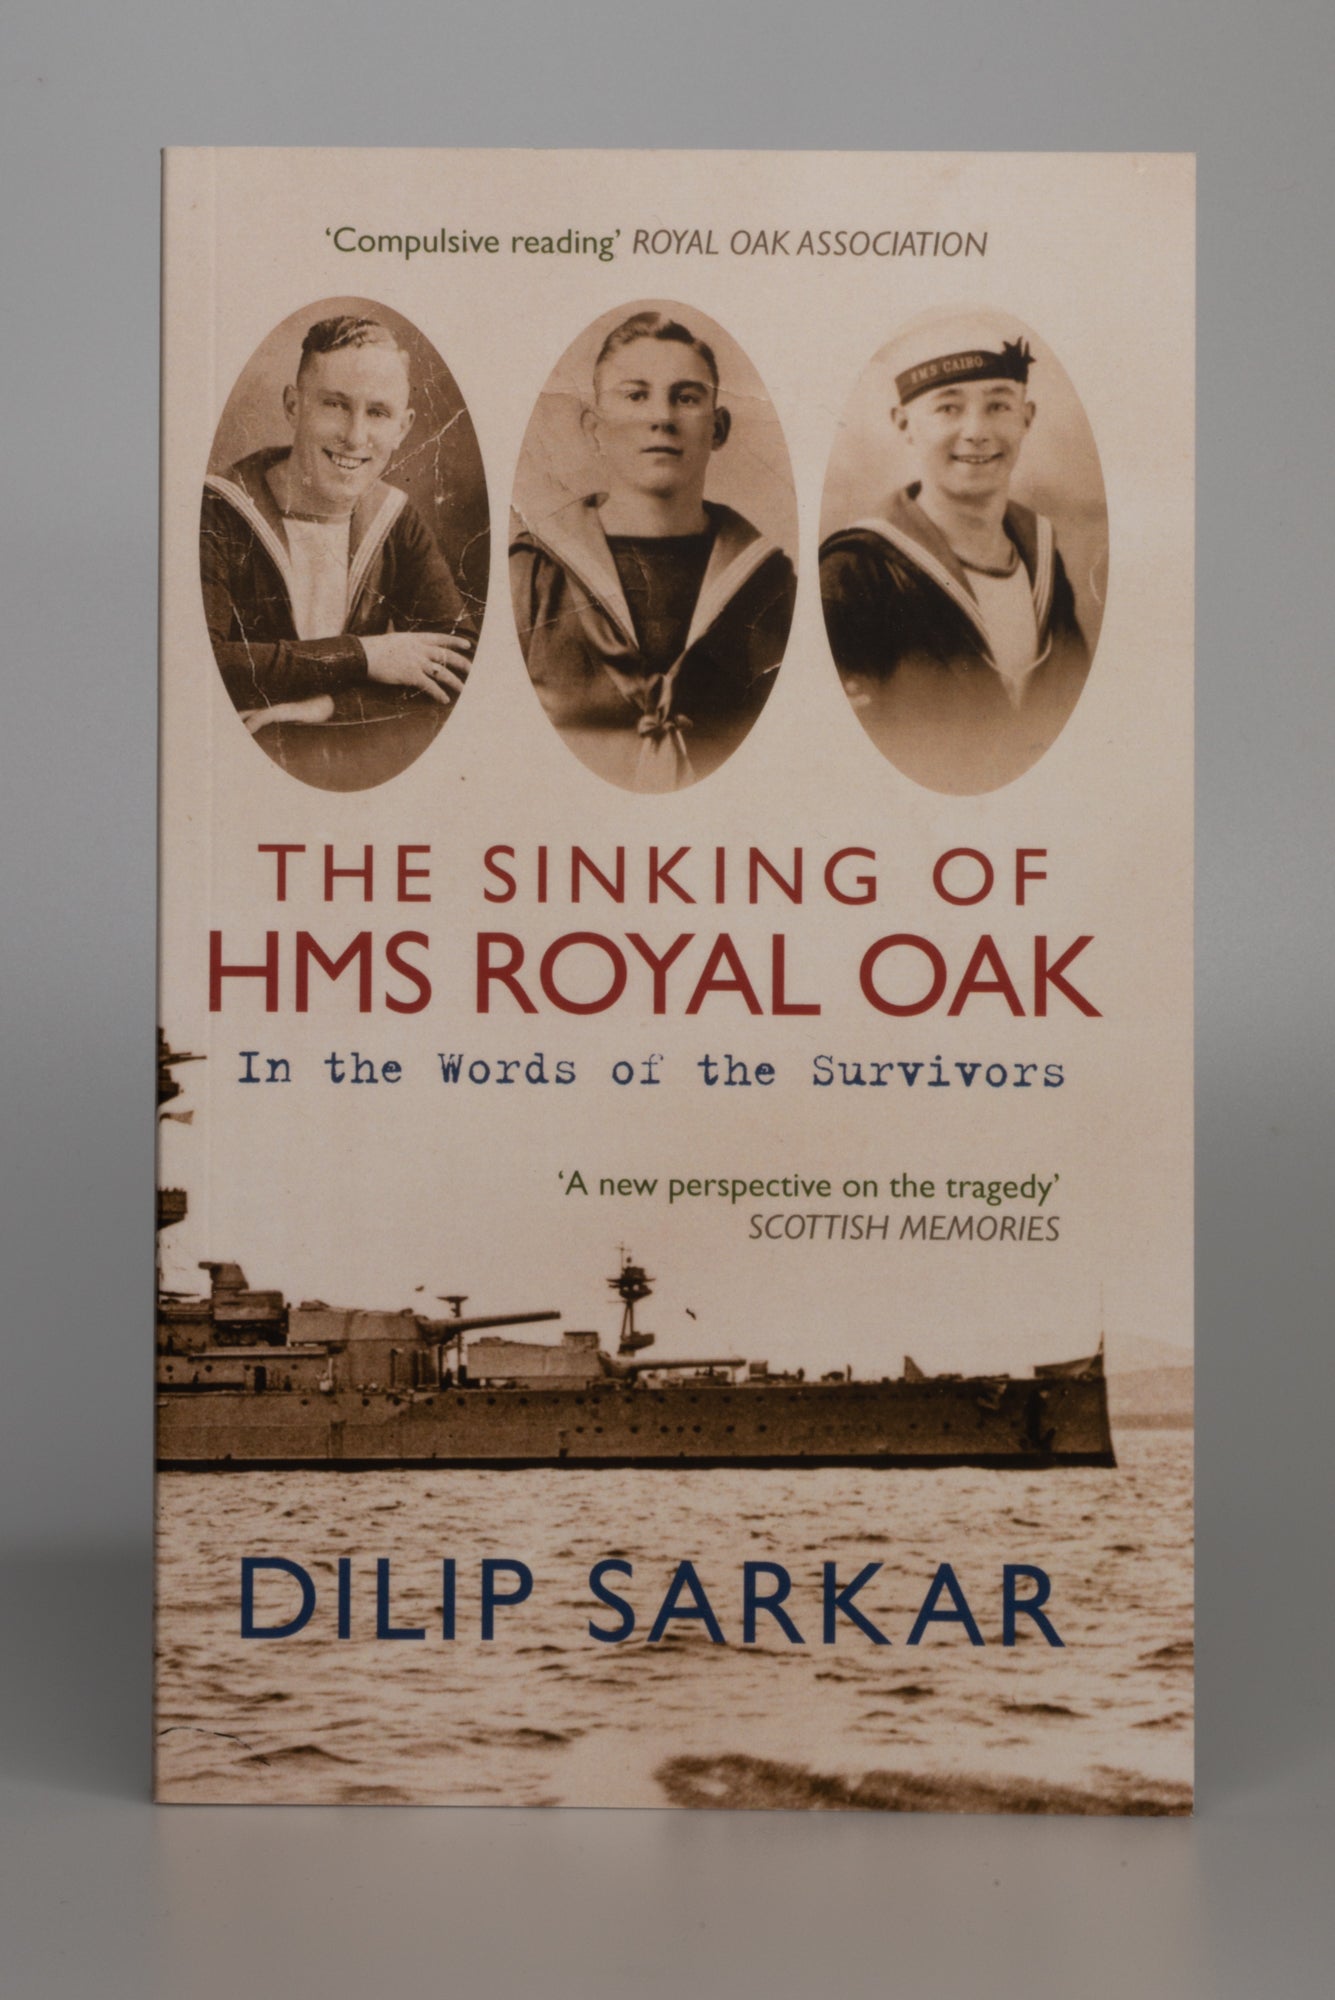 The Sinking of HMS Royal Oak: In the Words of the Survivors